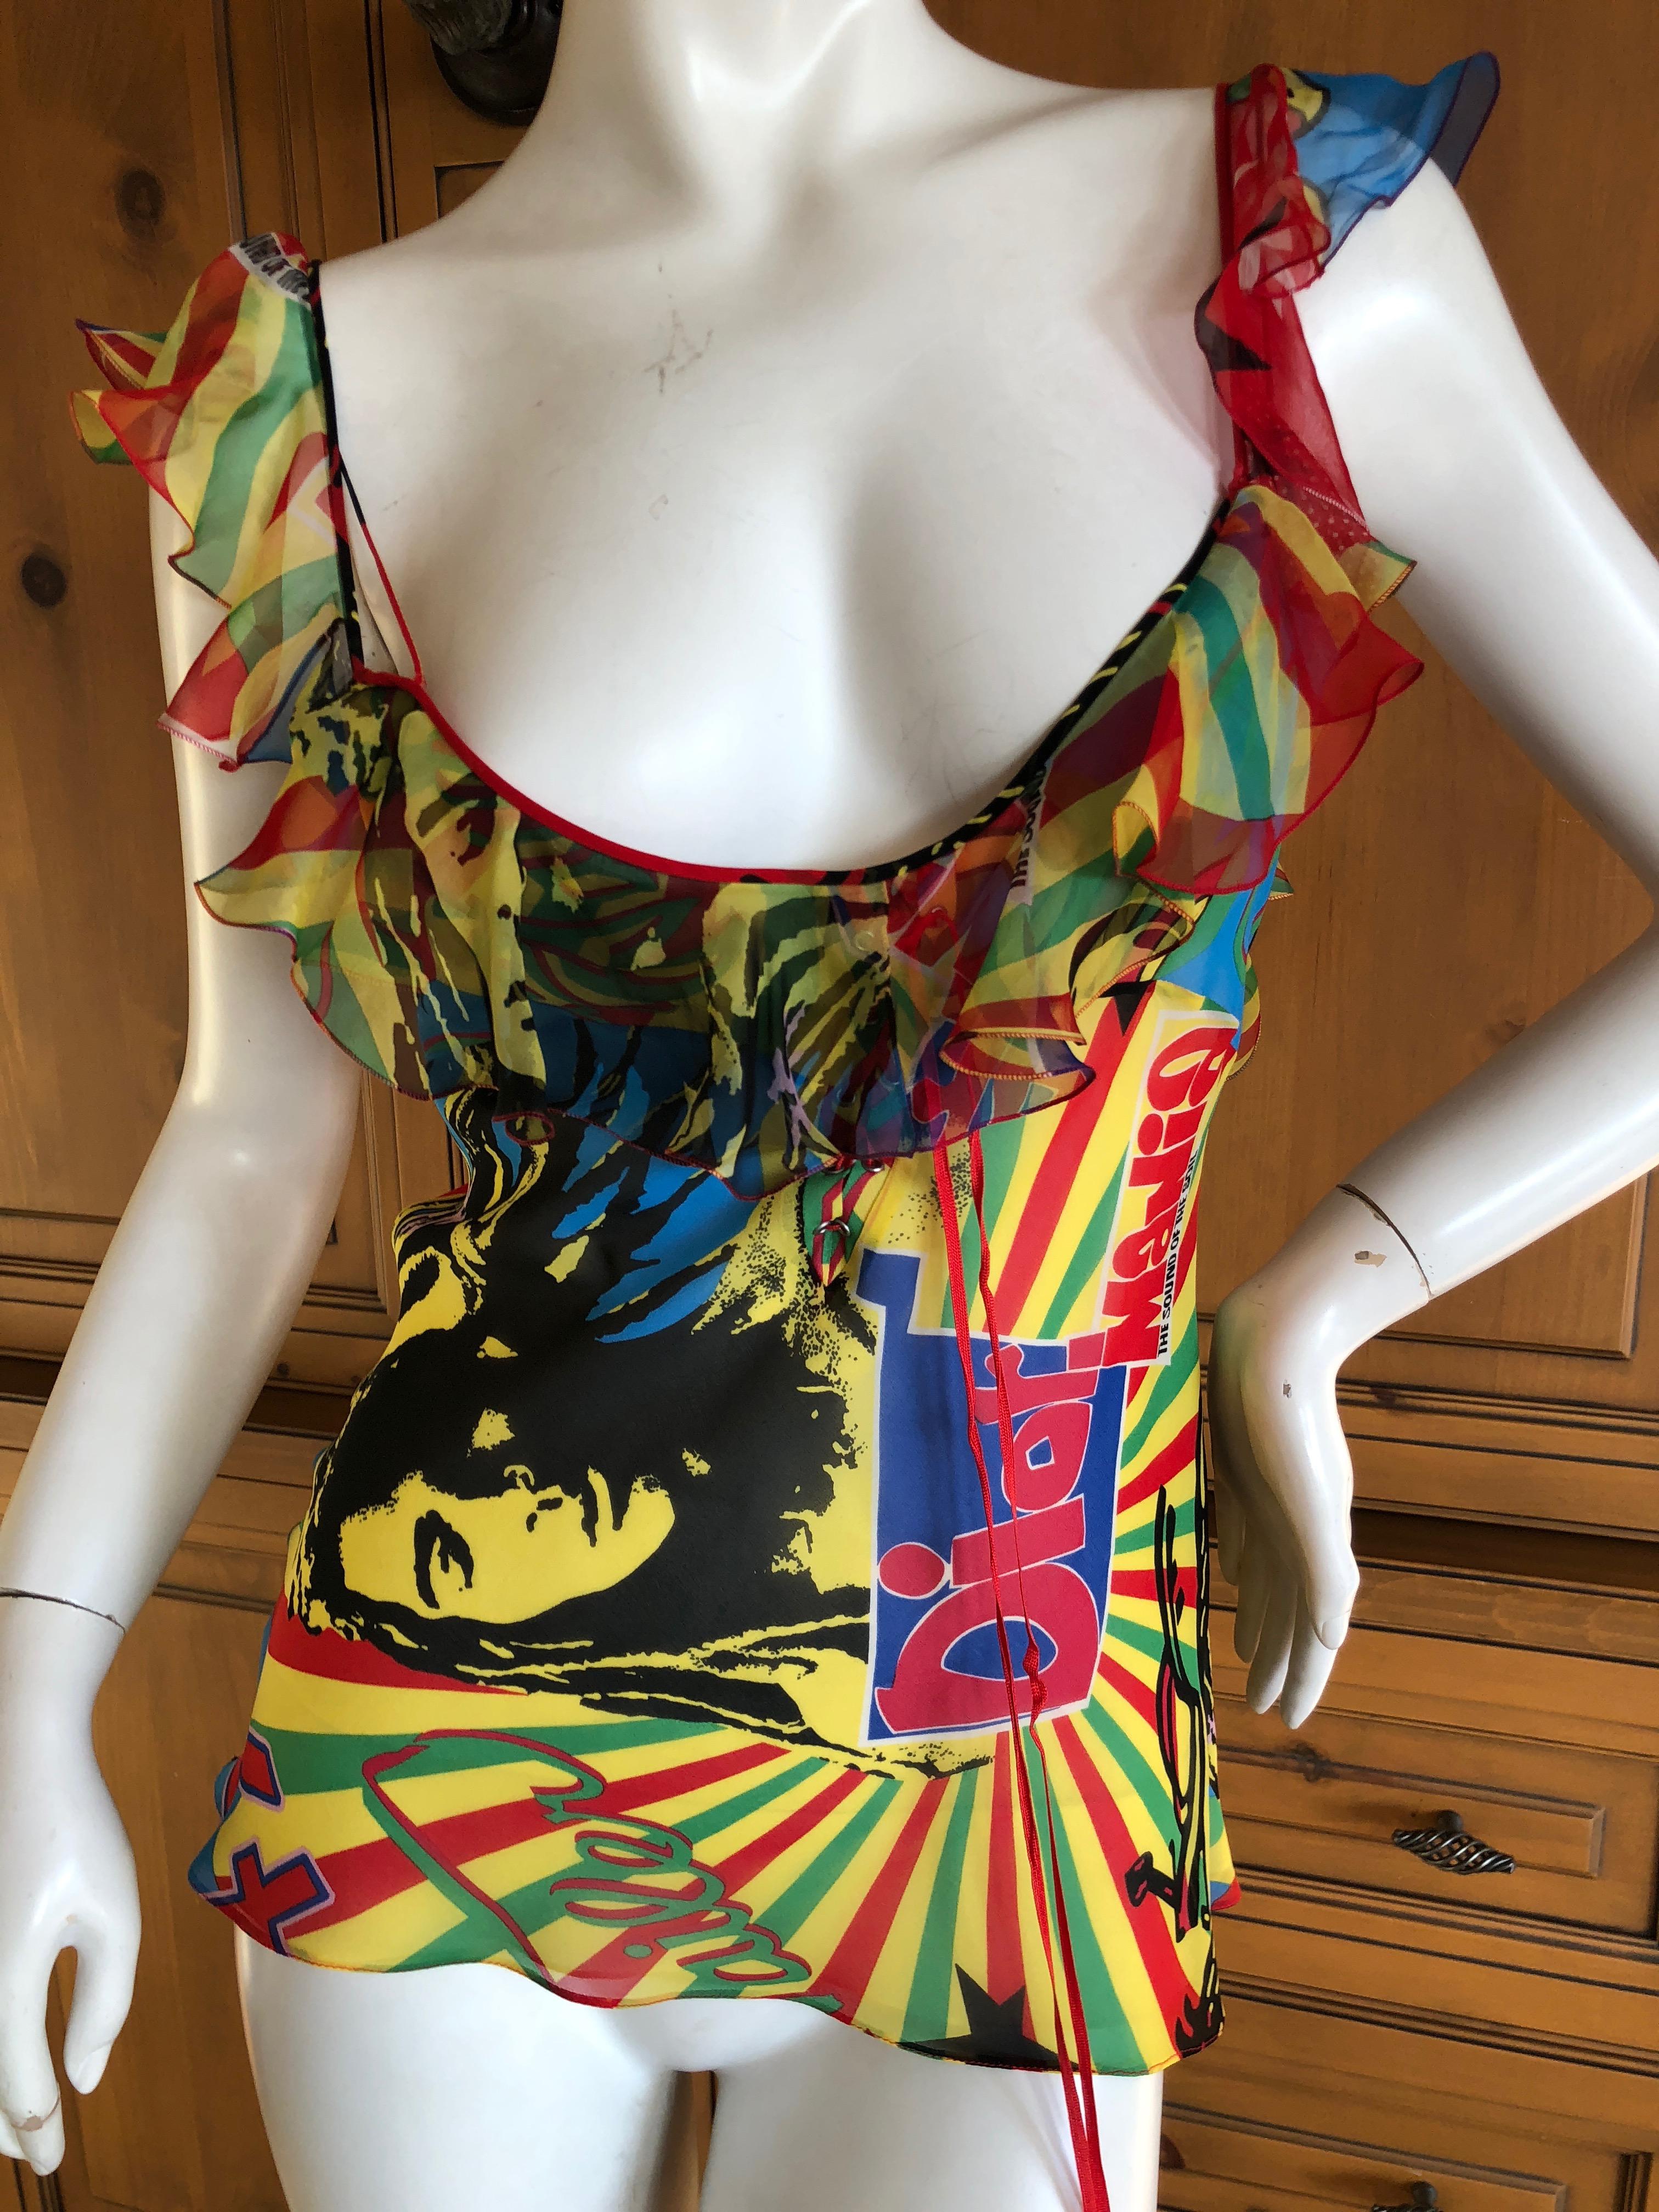 Christian Dior by Galliano 2004 Rasta Collection Silk Top with Chiffon Ruffles In Excellent Condition For Sale In Cloverdale, CA